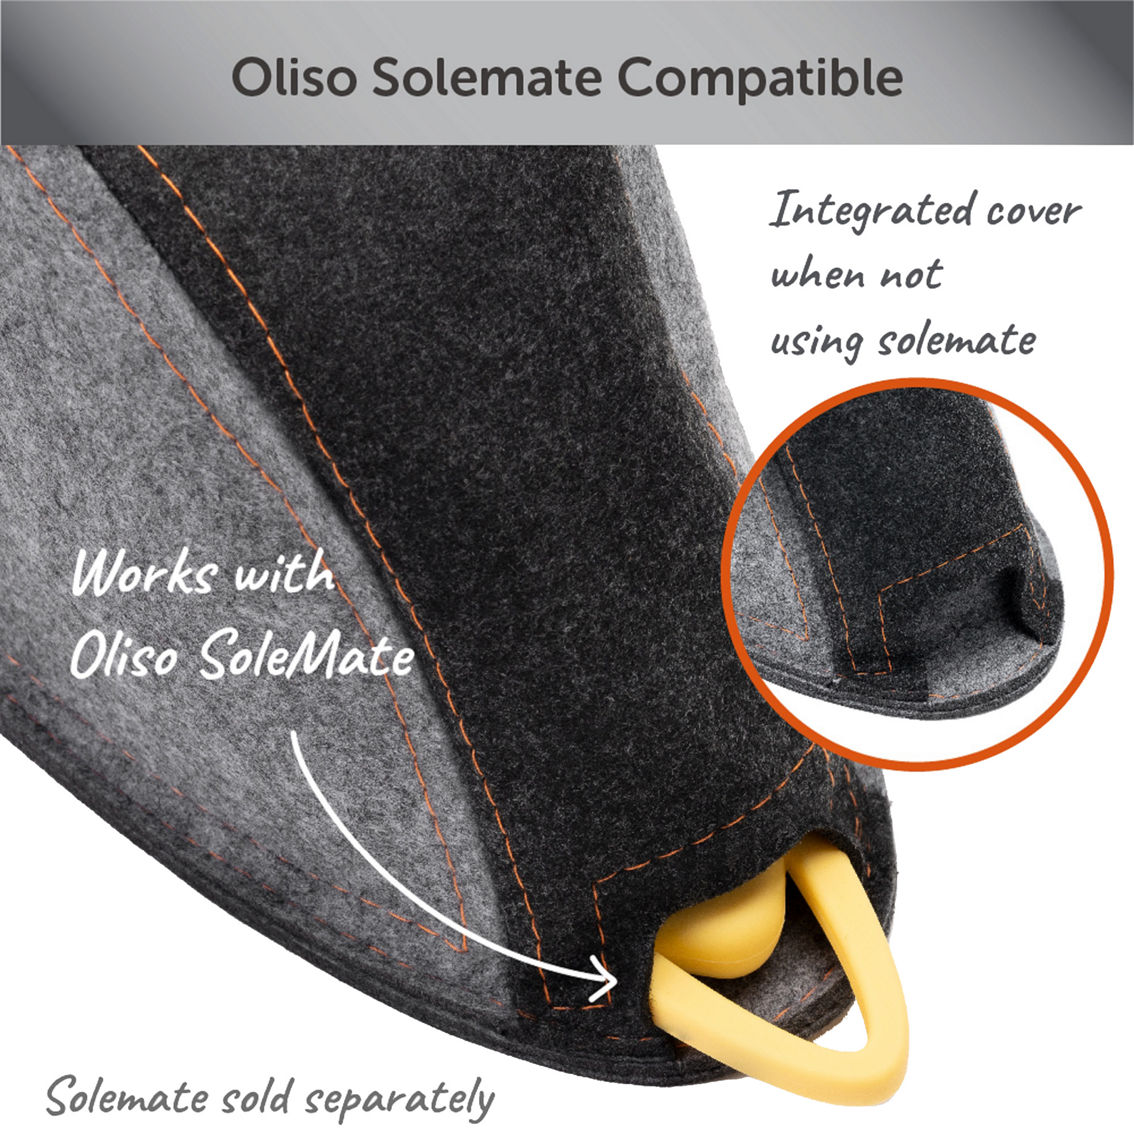 Oliso Large Carry Bag for the TG1600 ProPlus Iron - Image 6 of 6